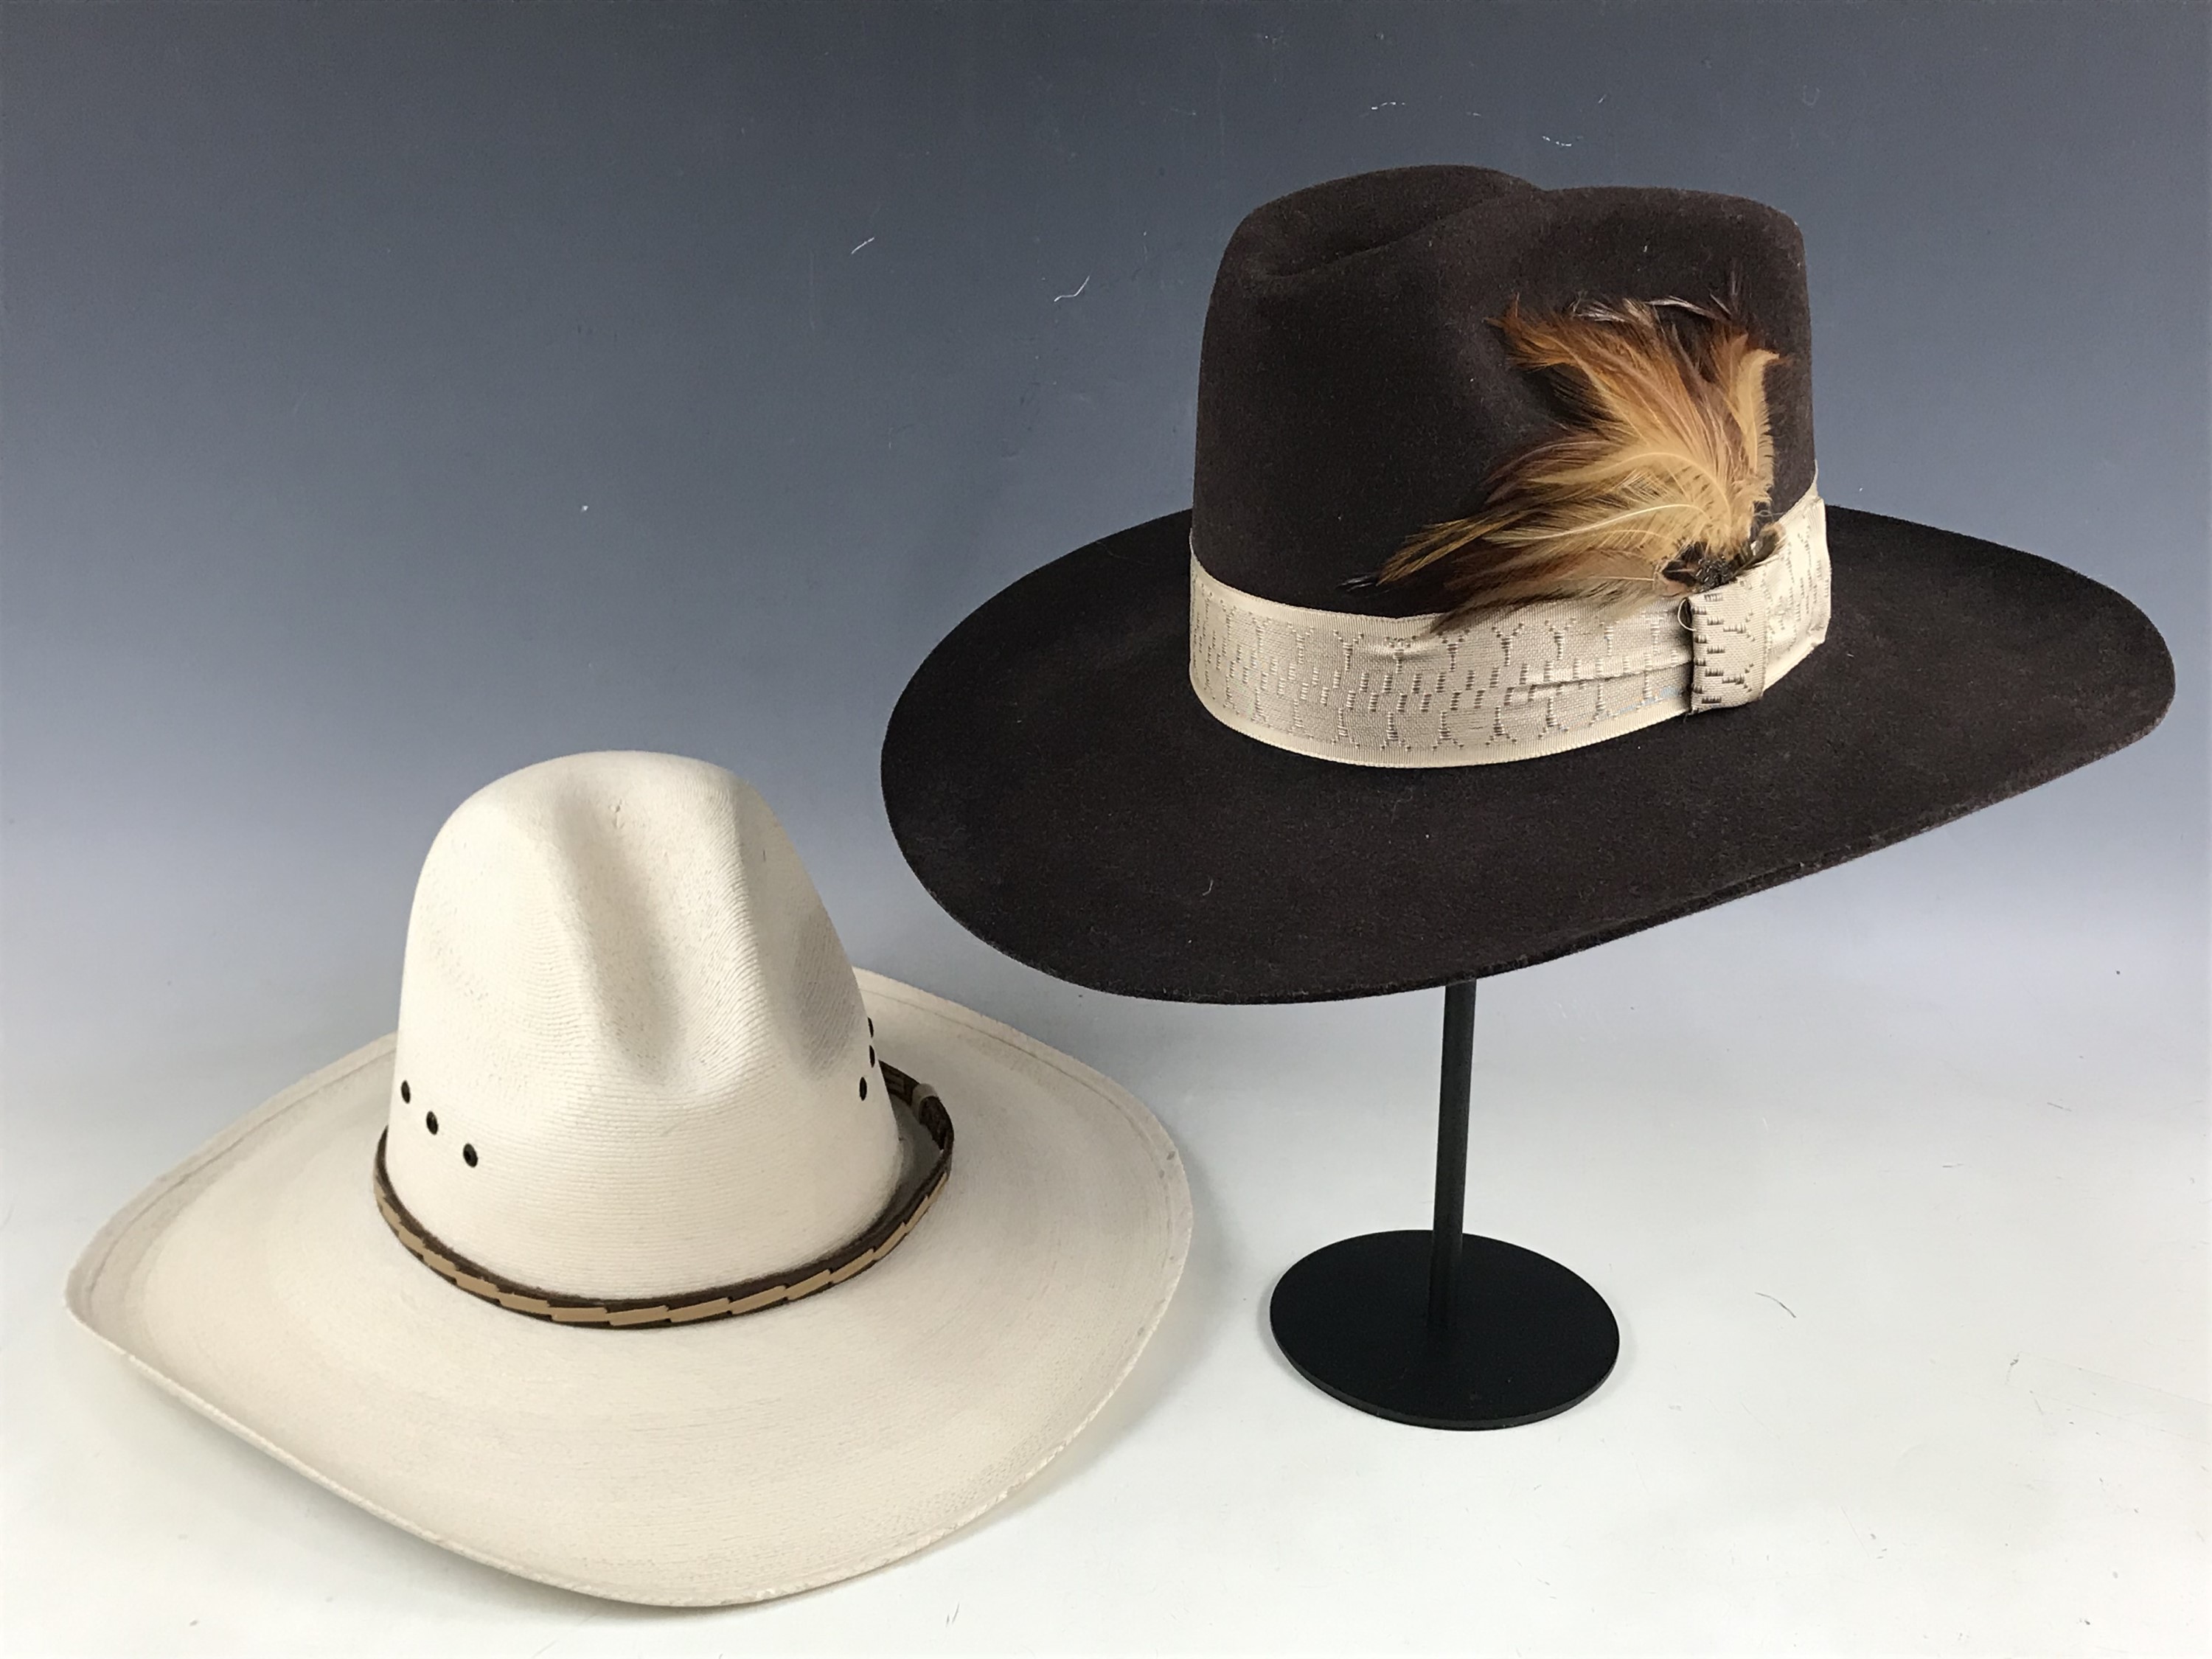 A Sahuayo Summit "Cowboy" hat, size 7 3/8, together with a Bee Deluxe Westerner hat, both in